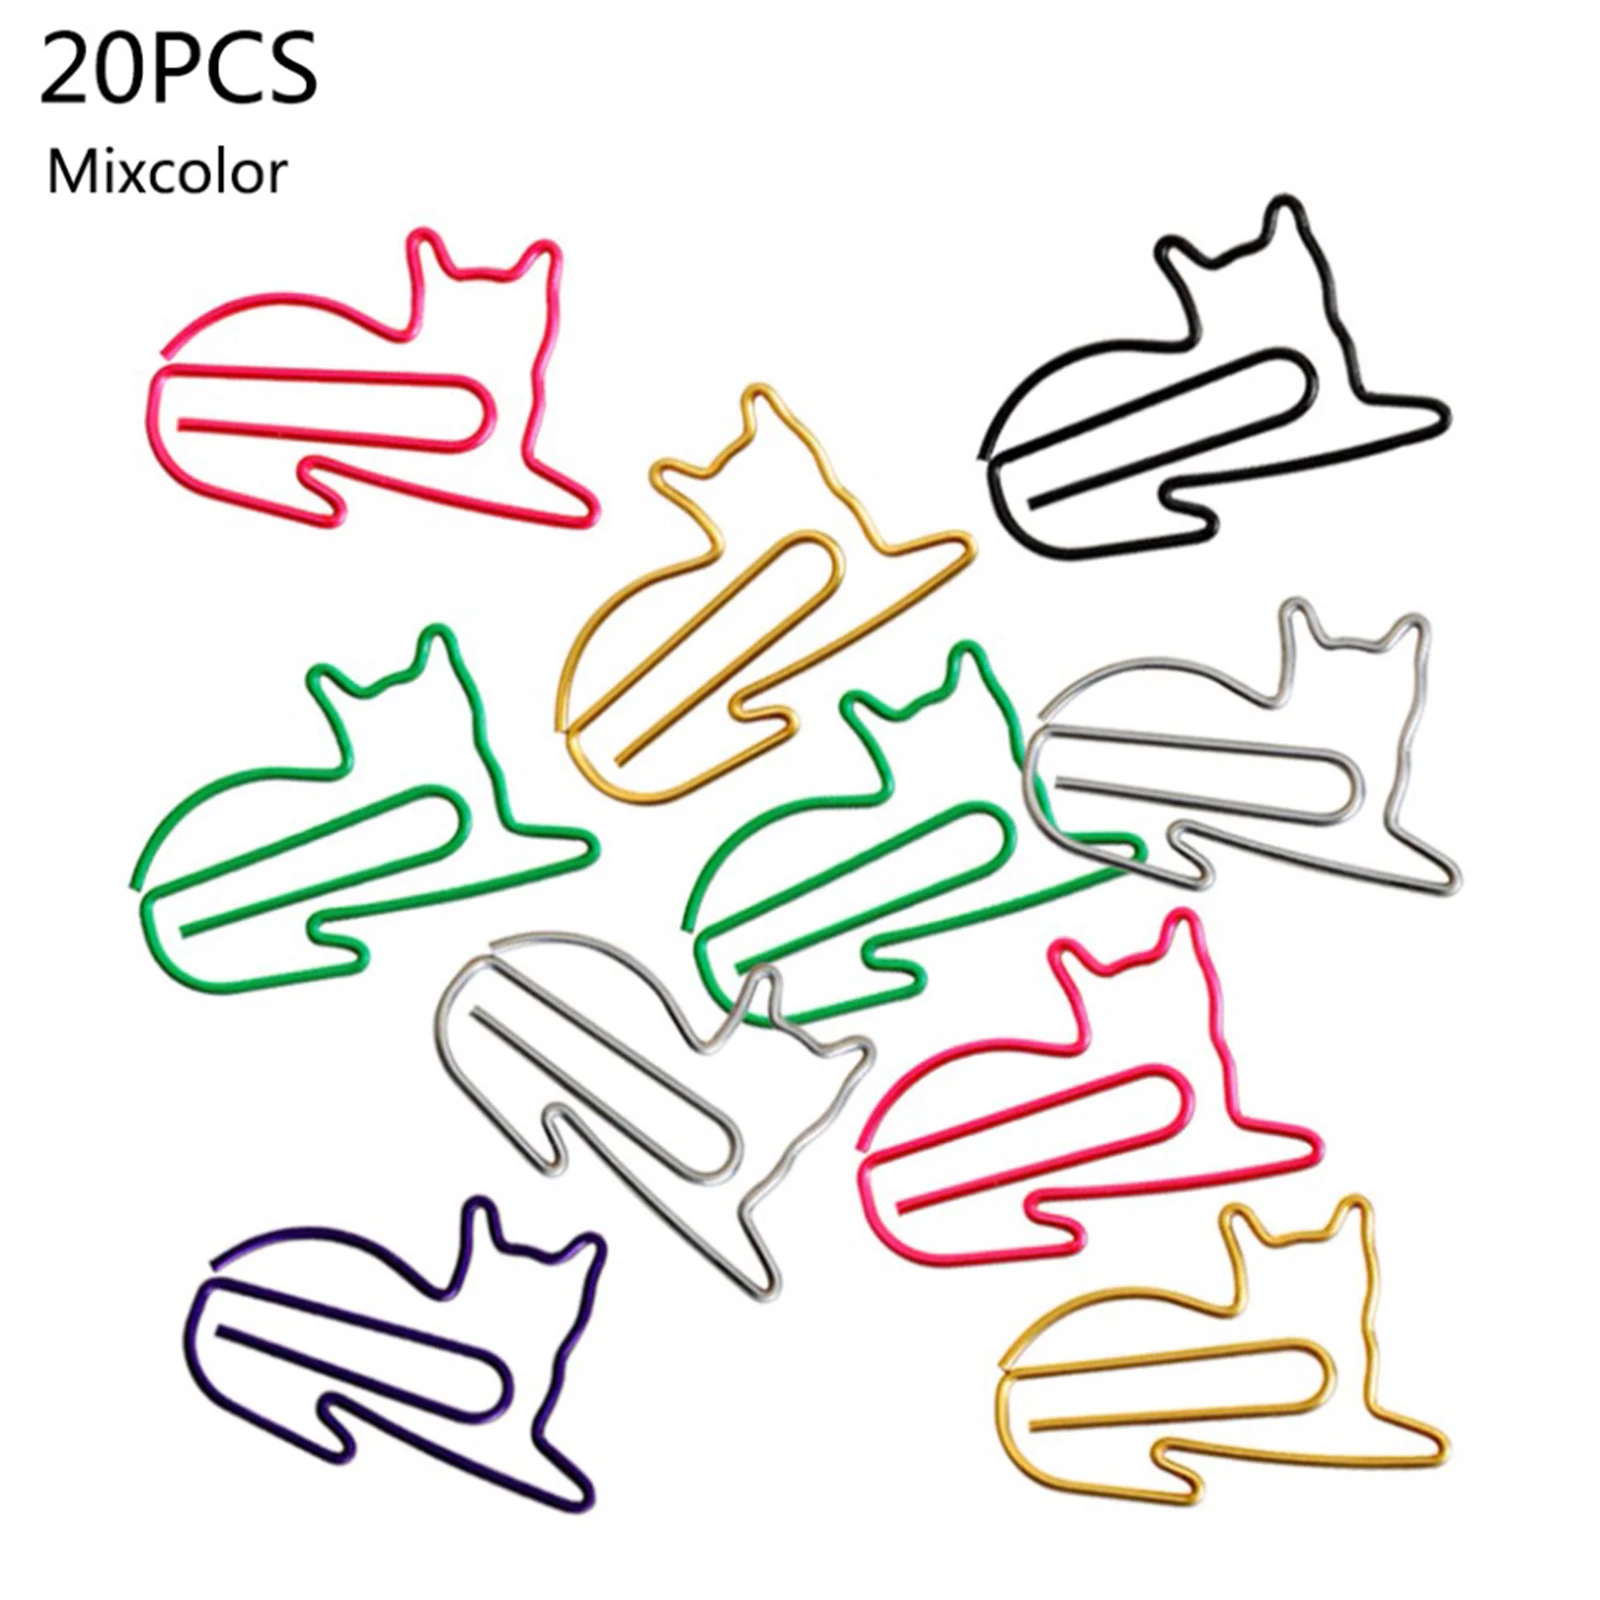 20pcs Cute Cat Shaped Metal Paper Clip Bookmark Planner Memo Clips For Book gold triangle paper clip metal pin simple modeling cute stationery paper clips planner clip cute clip paperclips lot clips metal